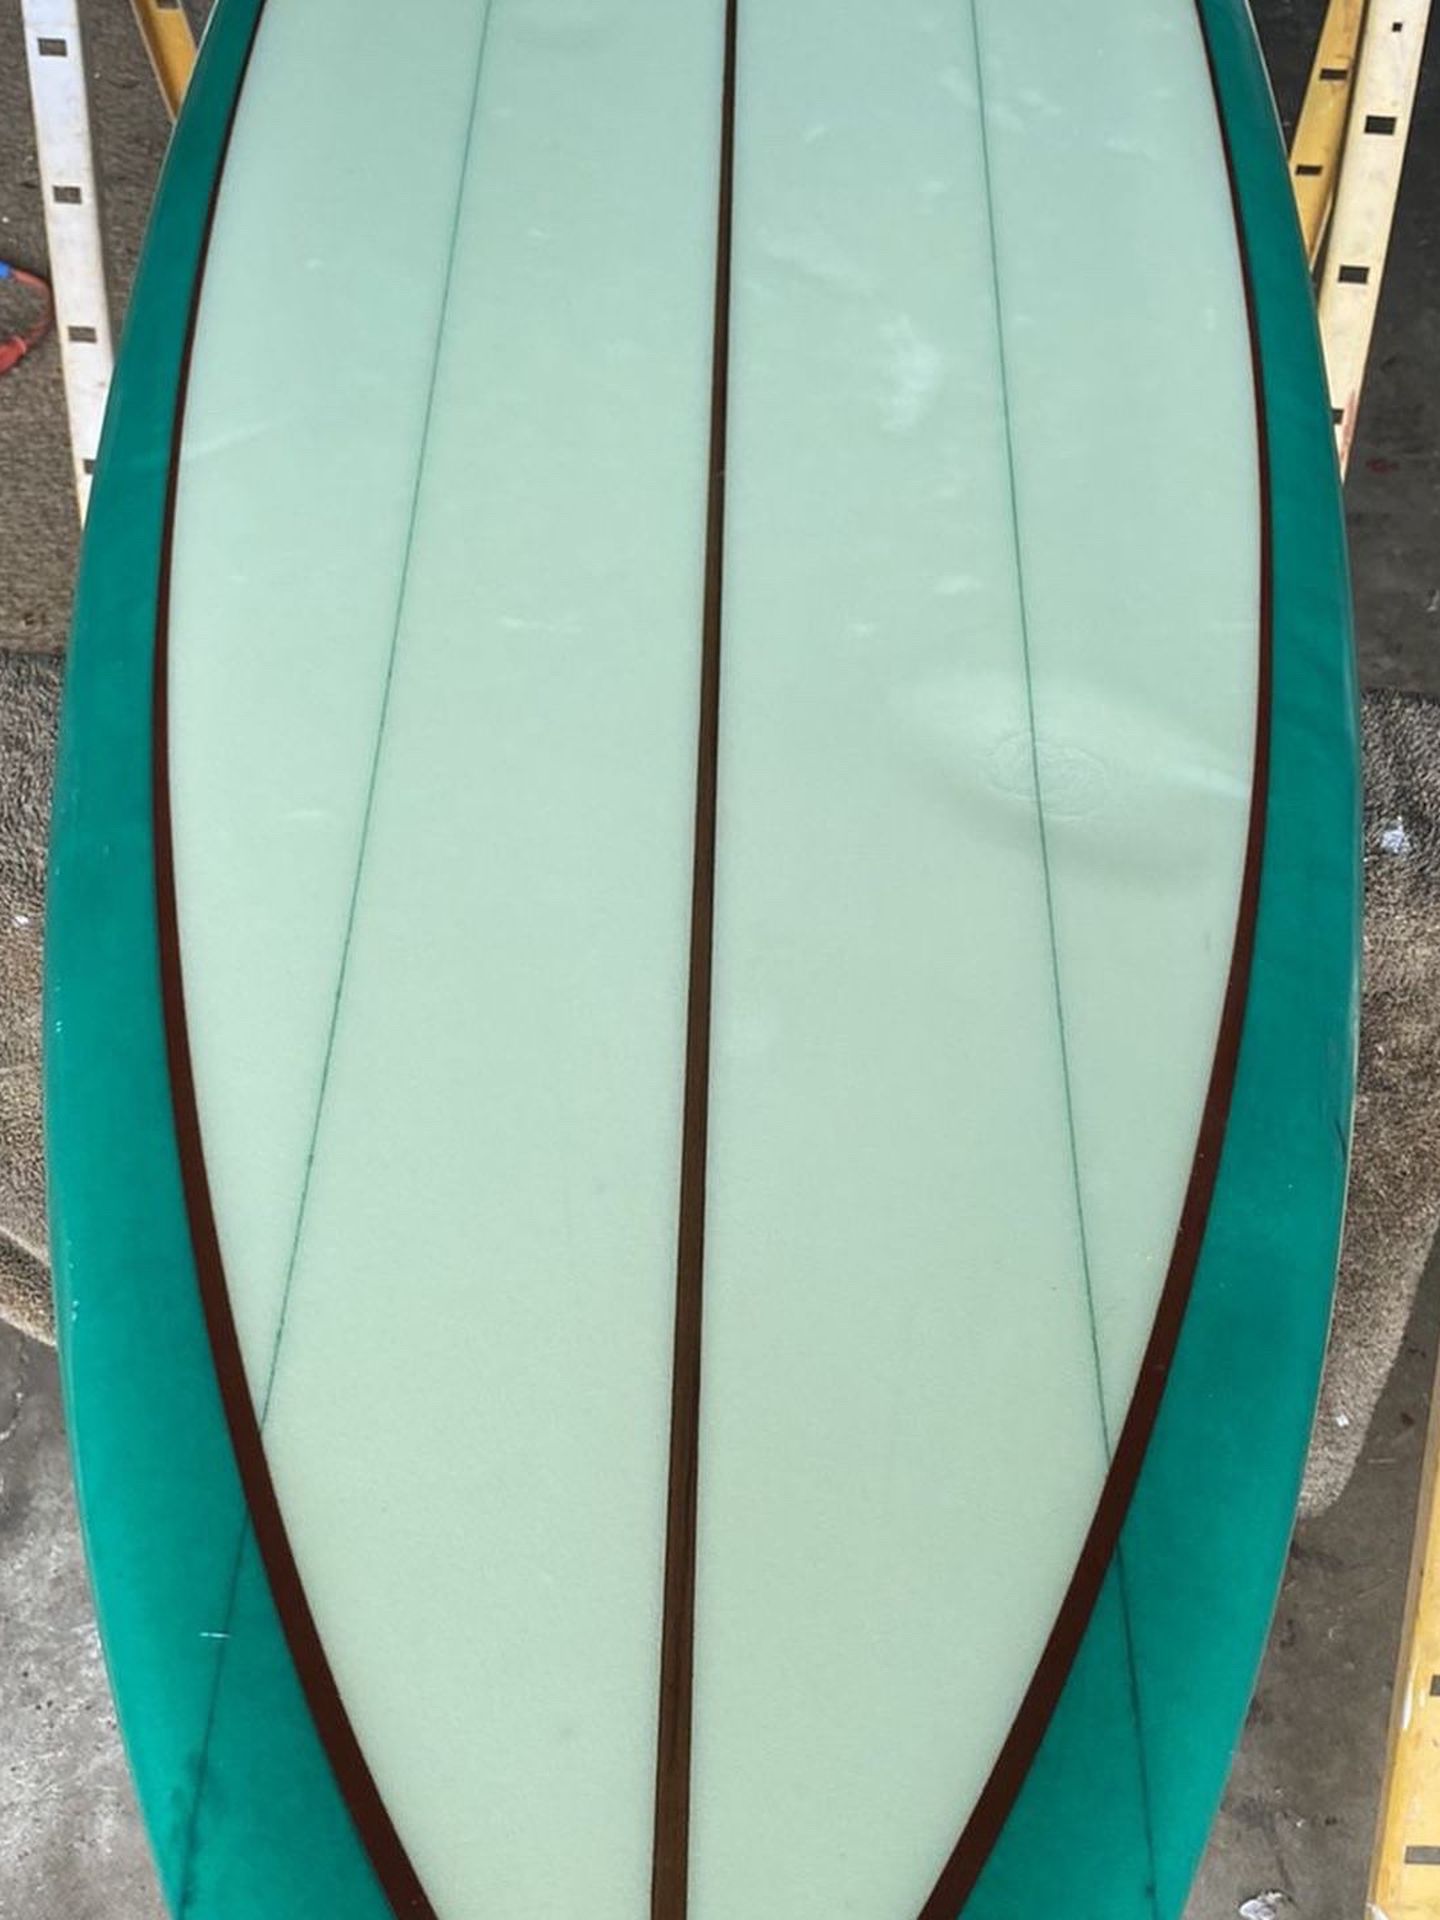 Very clean 7’3” Rich Pavel Long Fish Surfboard With Larry Gephart Fins Very Nice $650